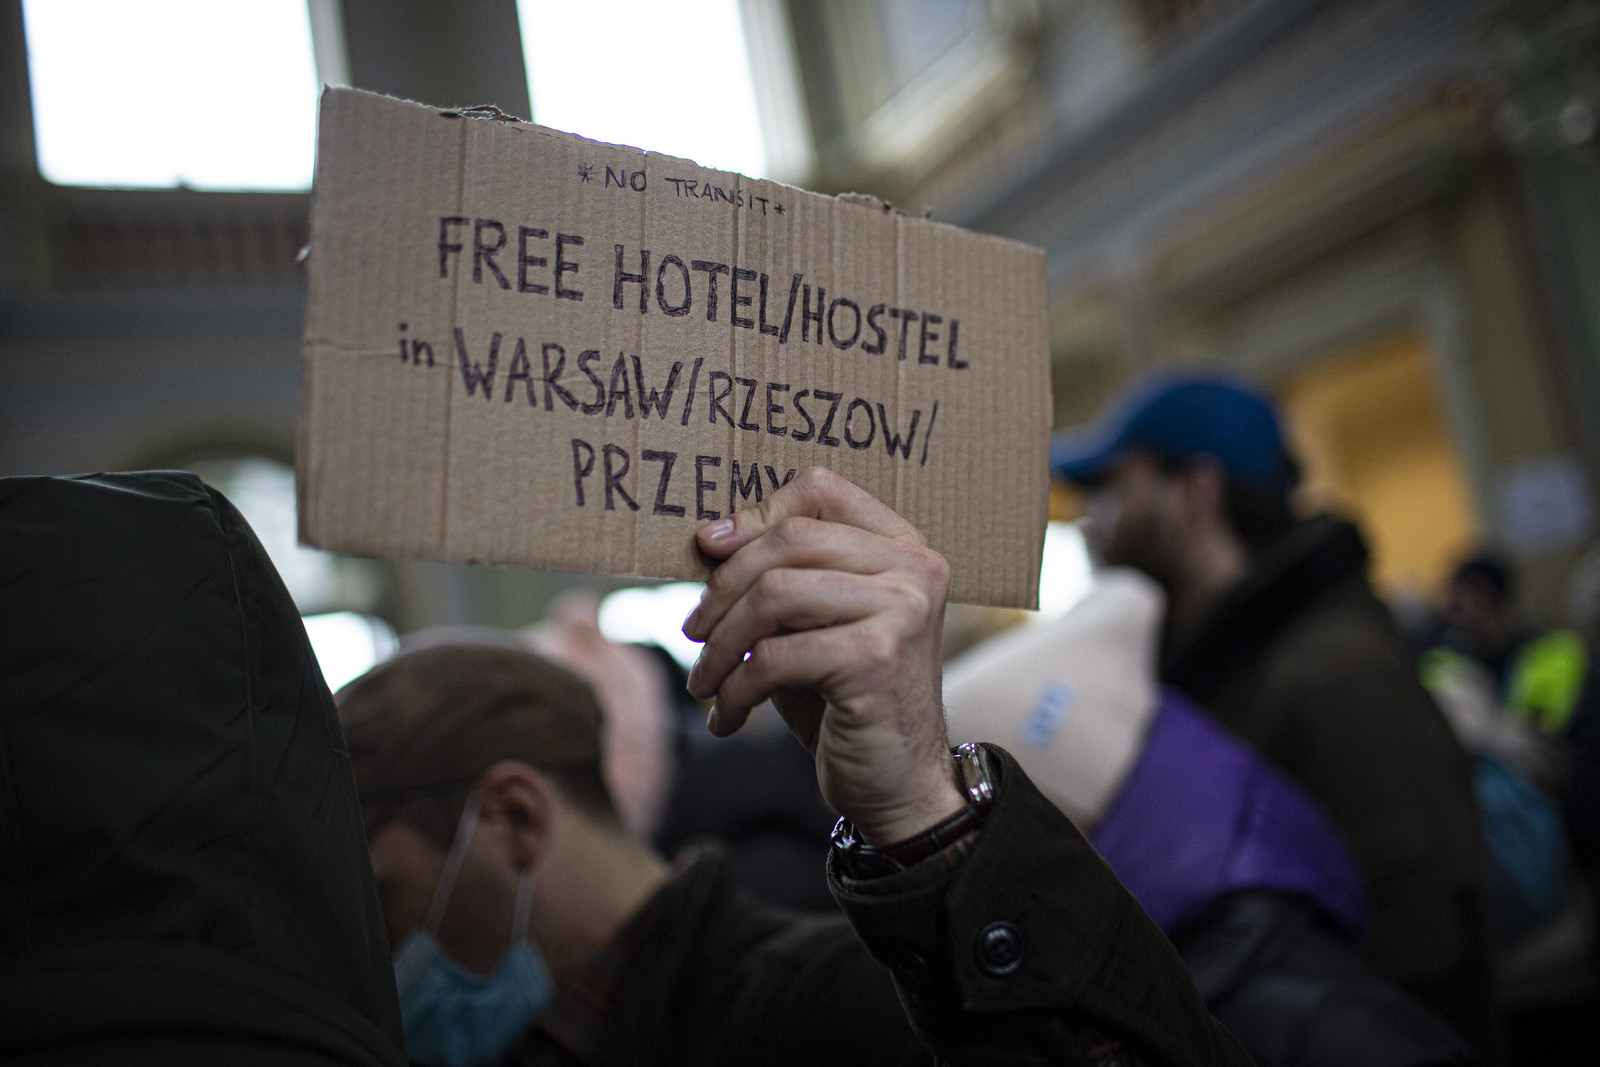 A hand holding a sign that reads "Free hotel/hostel".